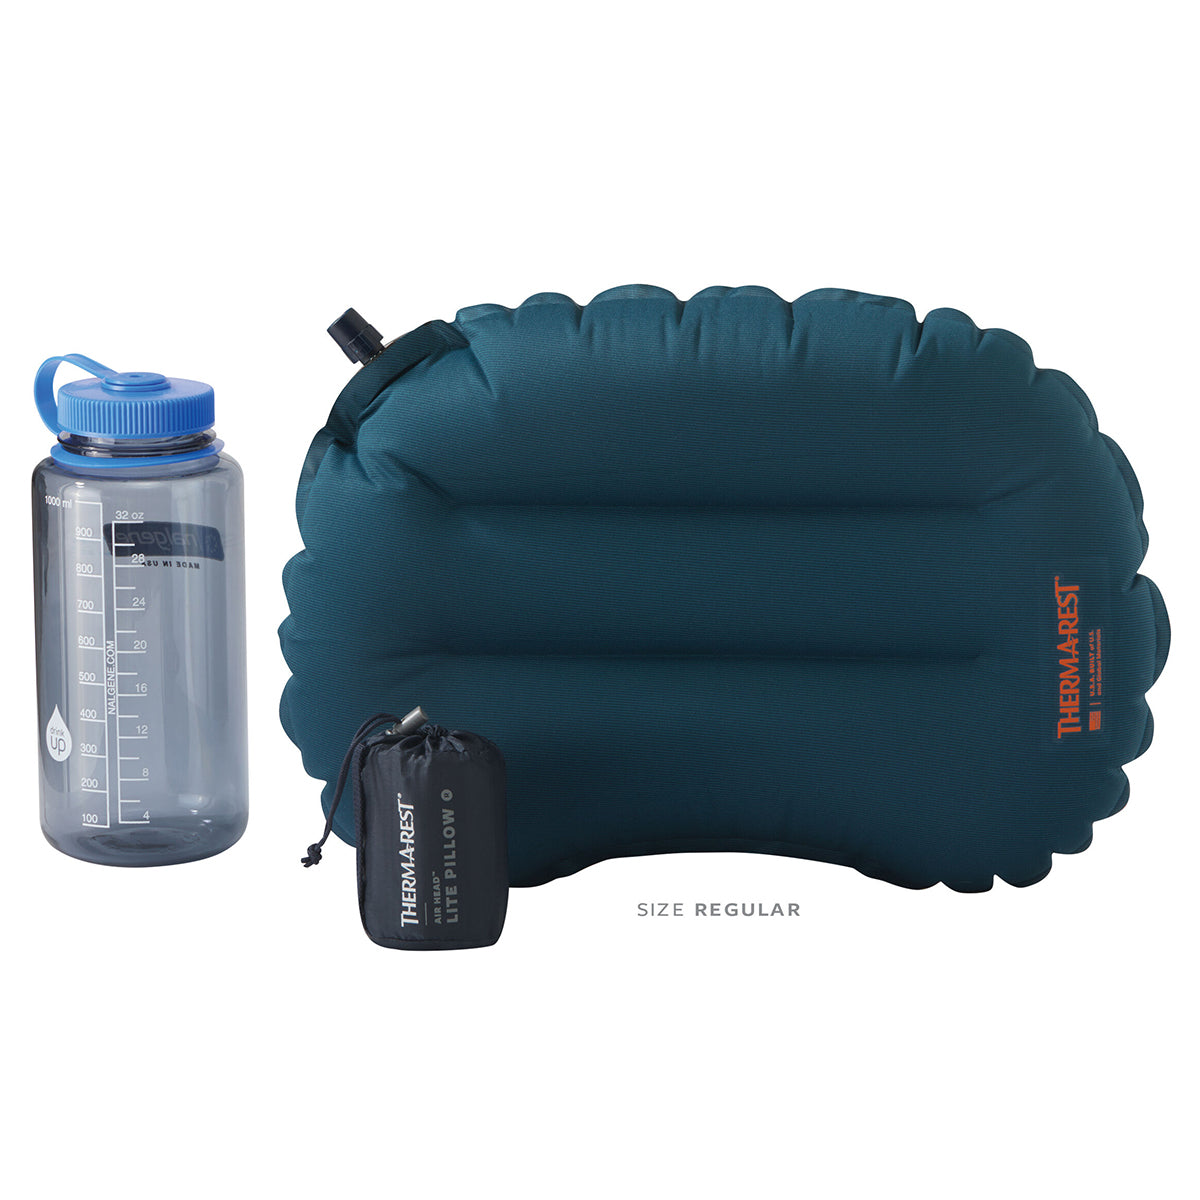 Therm-A-Rest AirHead Lite Pillow by Thermarest | Camping - goHUNT Shop